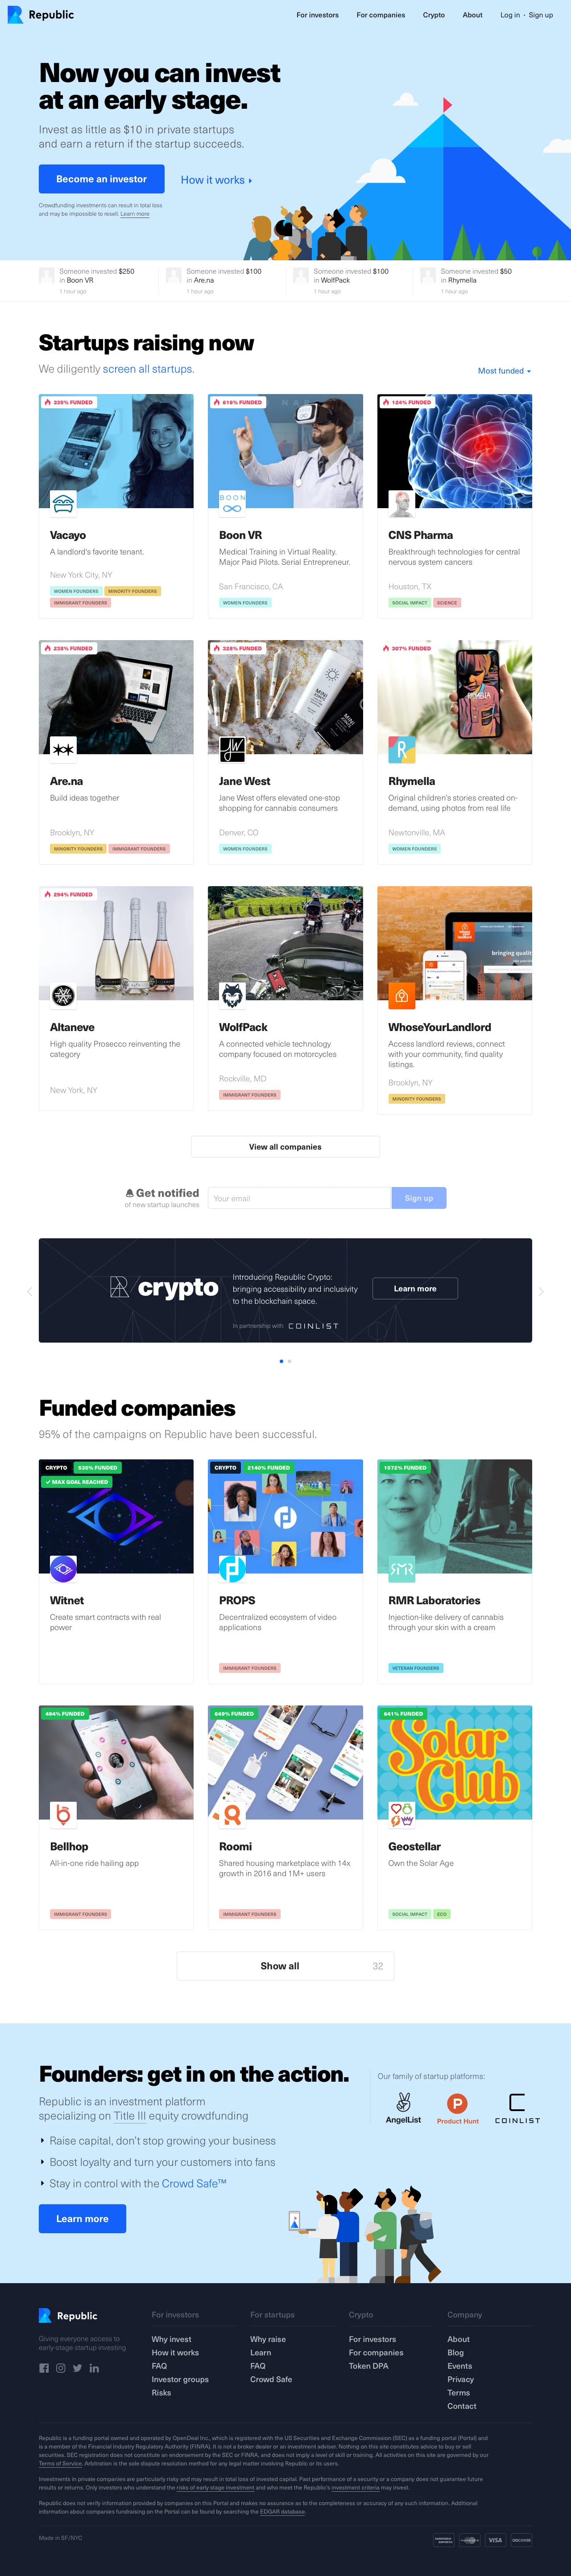 Republic Landing Page Example: An investment platform where you can invest as little as $10 in the startups you believe in.